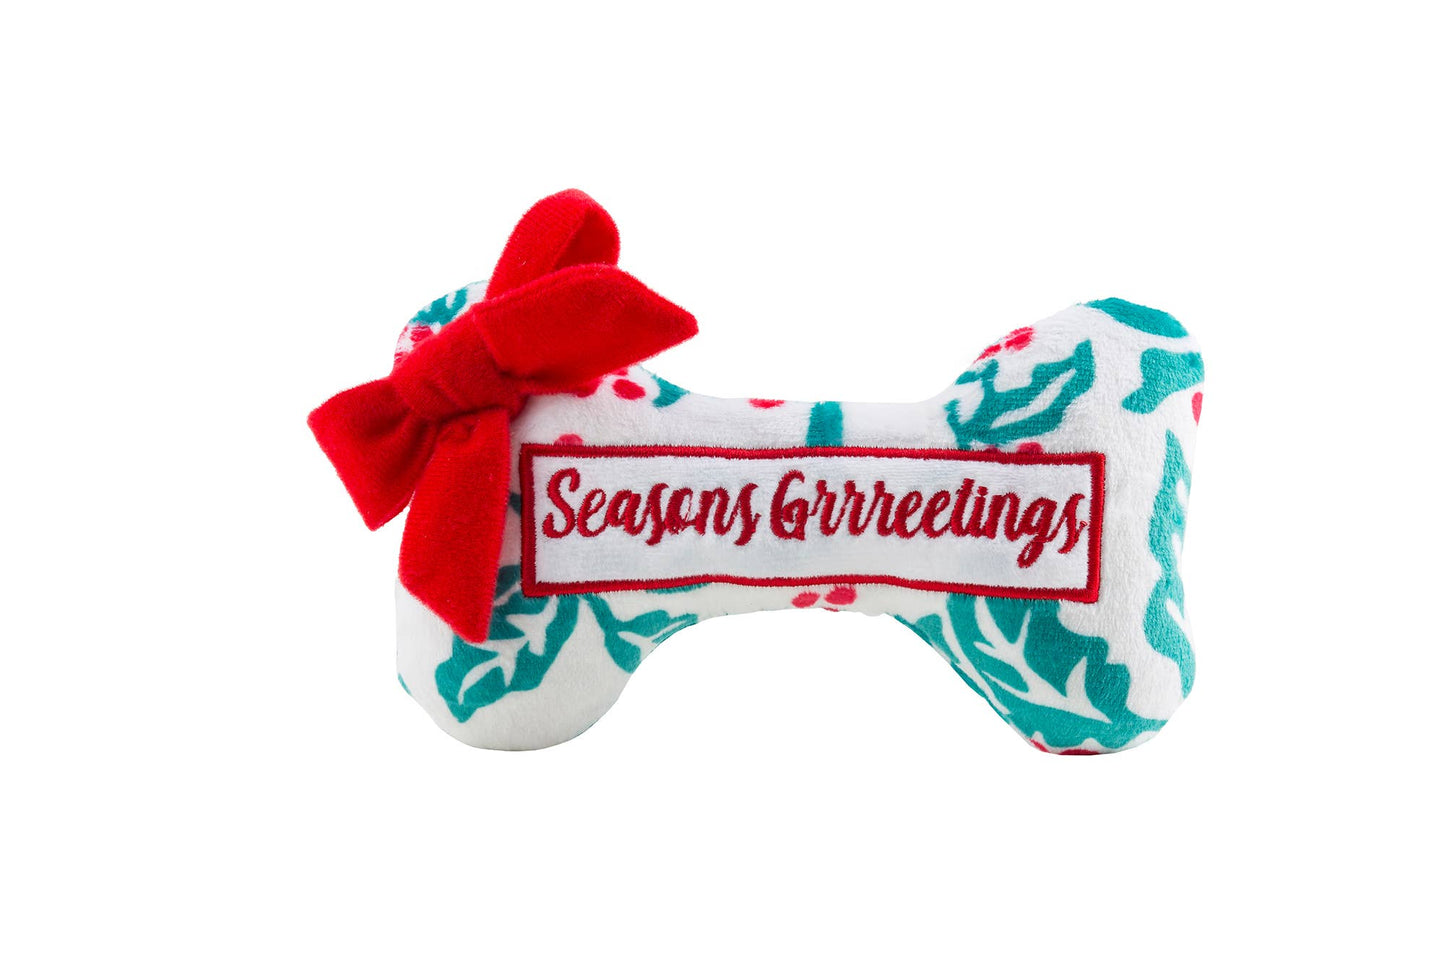 Load image into Gallery viewer, Haute Diggity Dog - Seasons Grrreetings Puppermint Bones Christmas Dog Toys  Image
